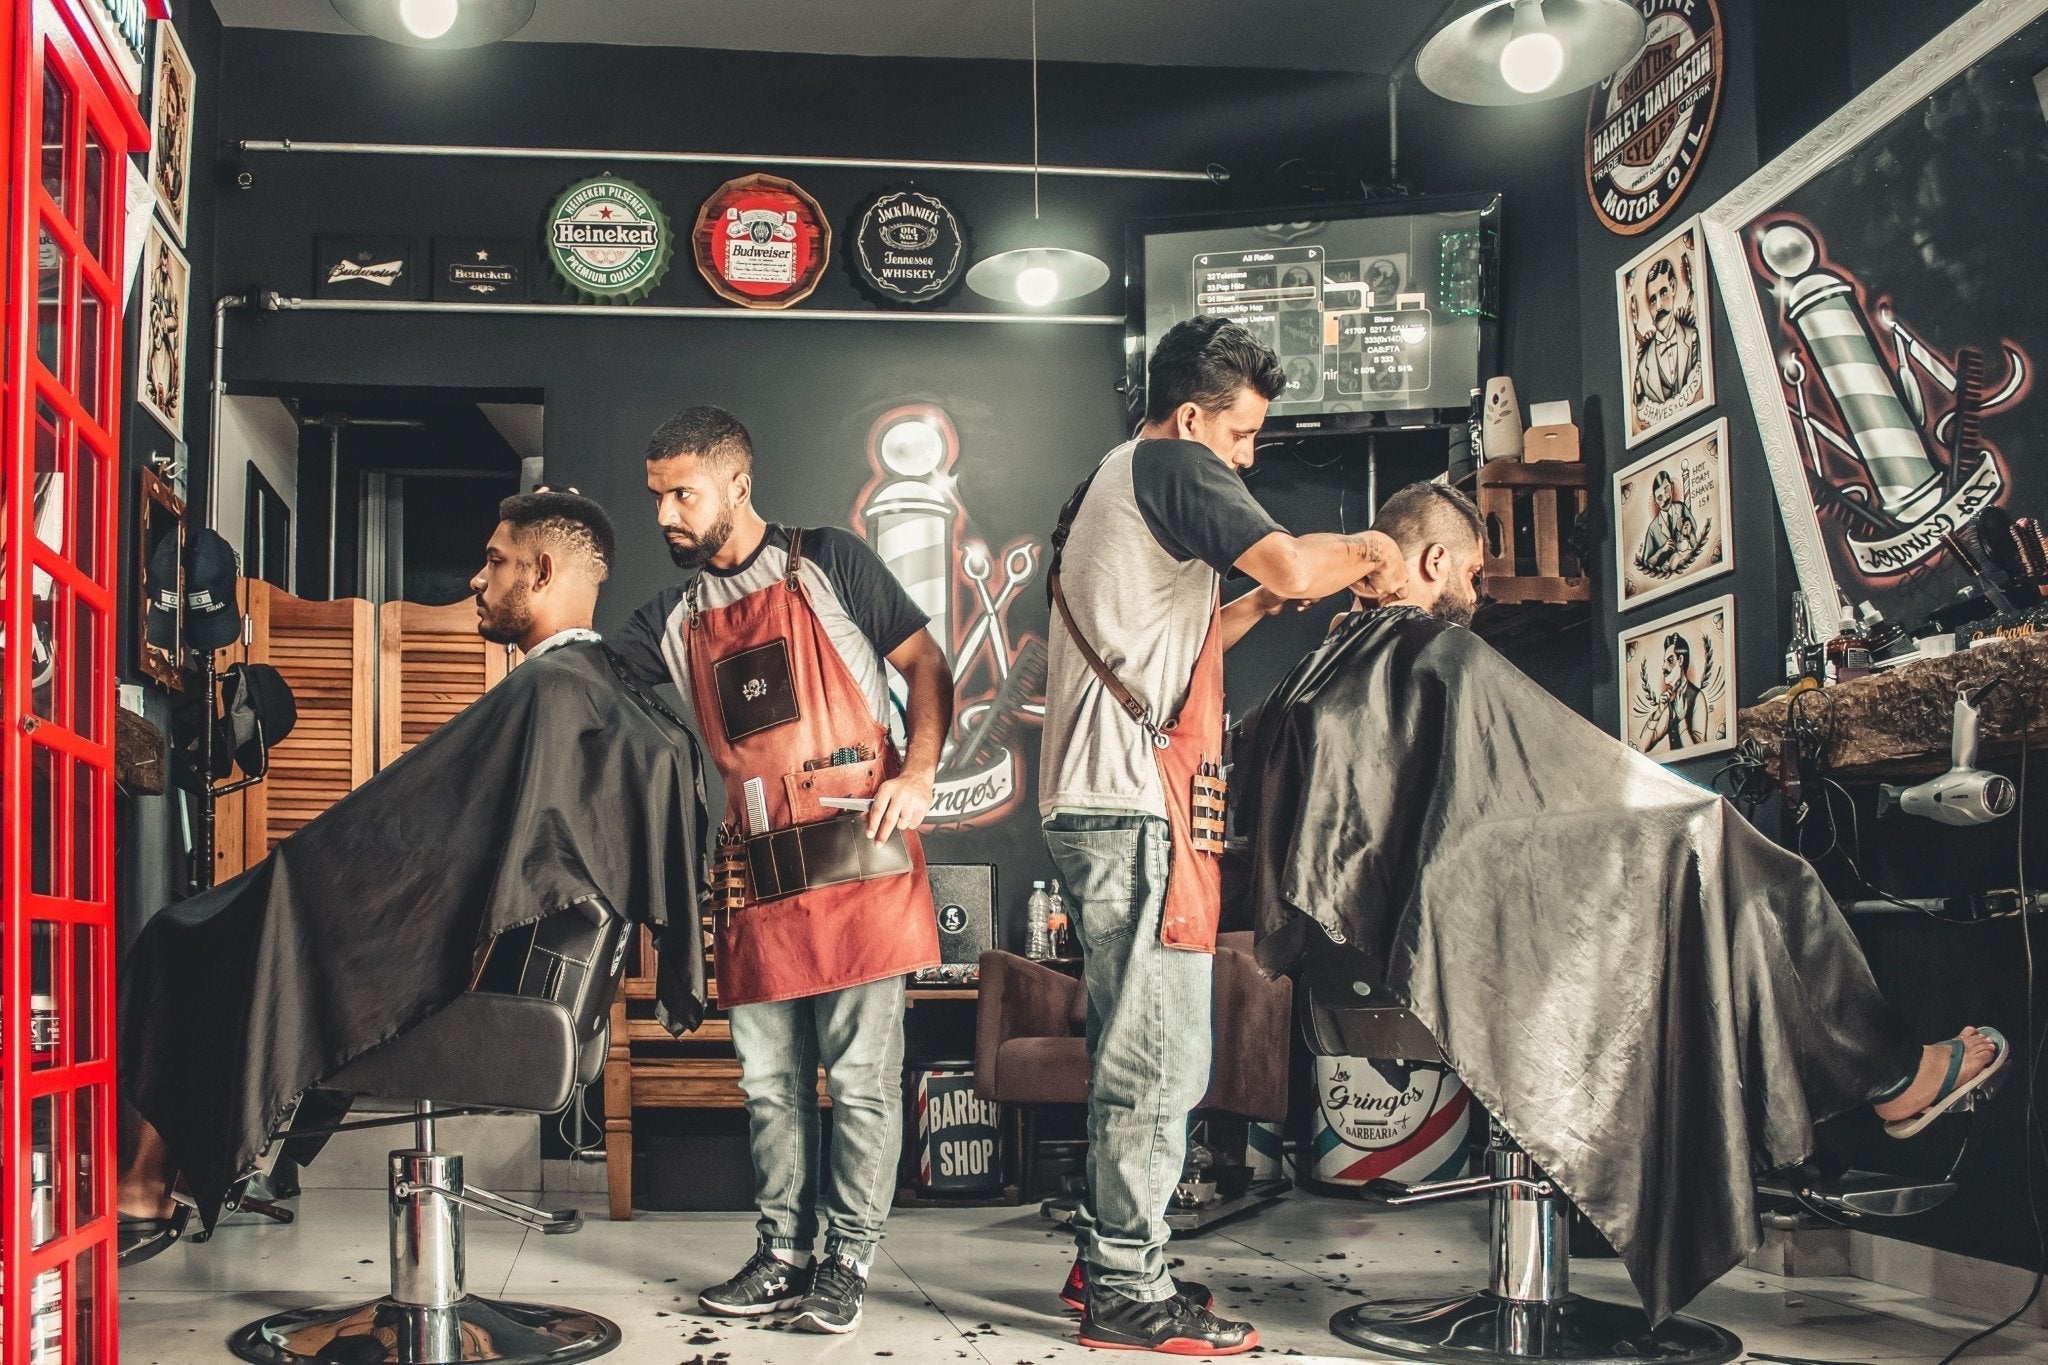 5 Tips To Manage Your Salon Team Effectively